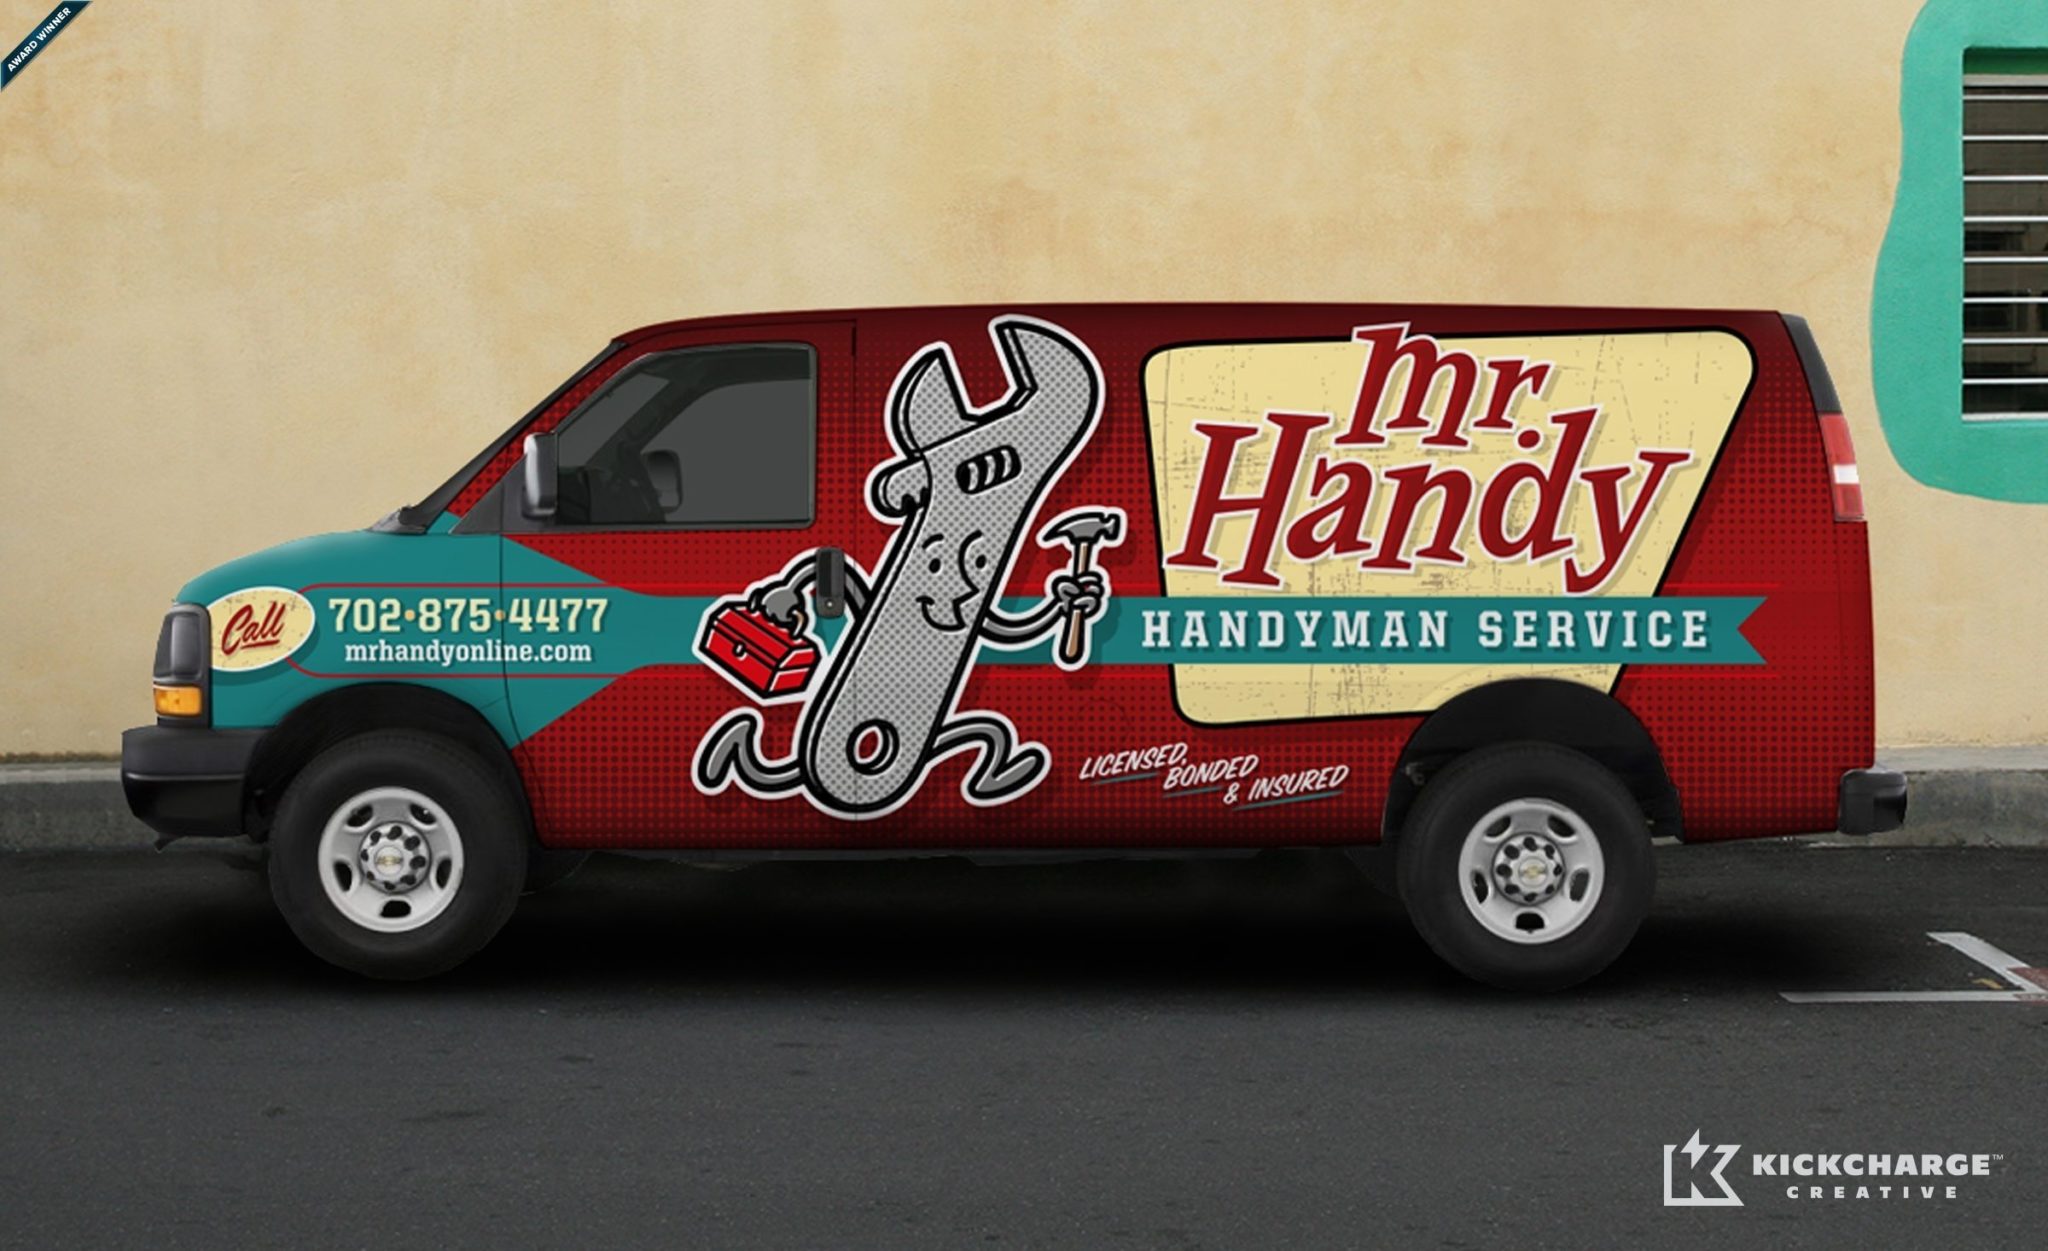 Award-winning retro and vintage styled truck wrap design and fleet branding for a handyman in Las Vegas.